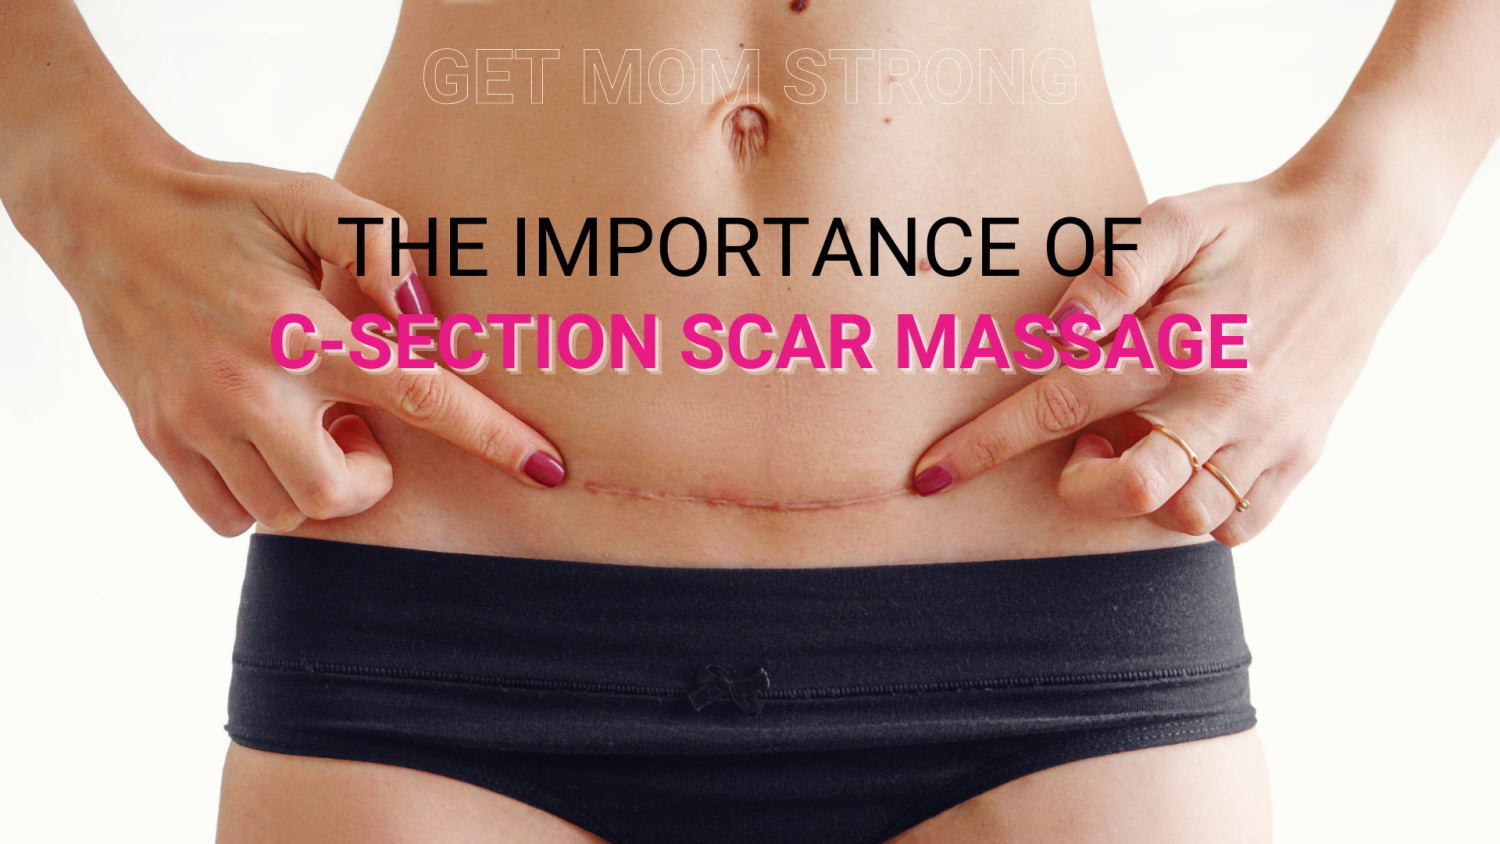 C-Section Scar Massage: How and Why